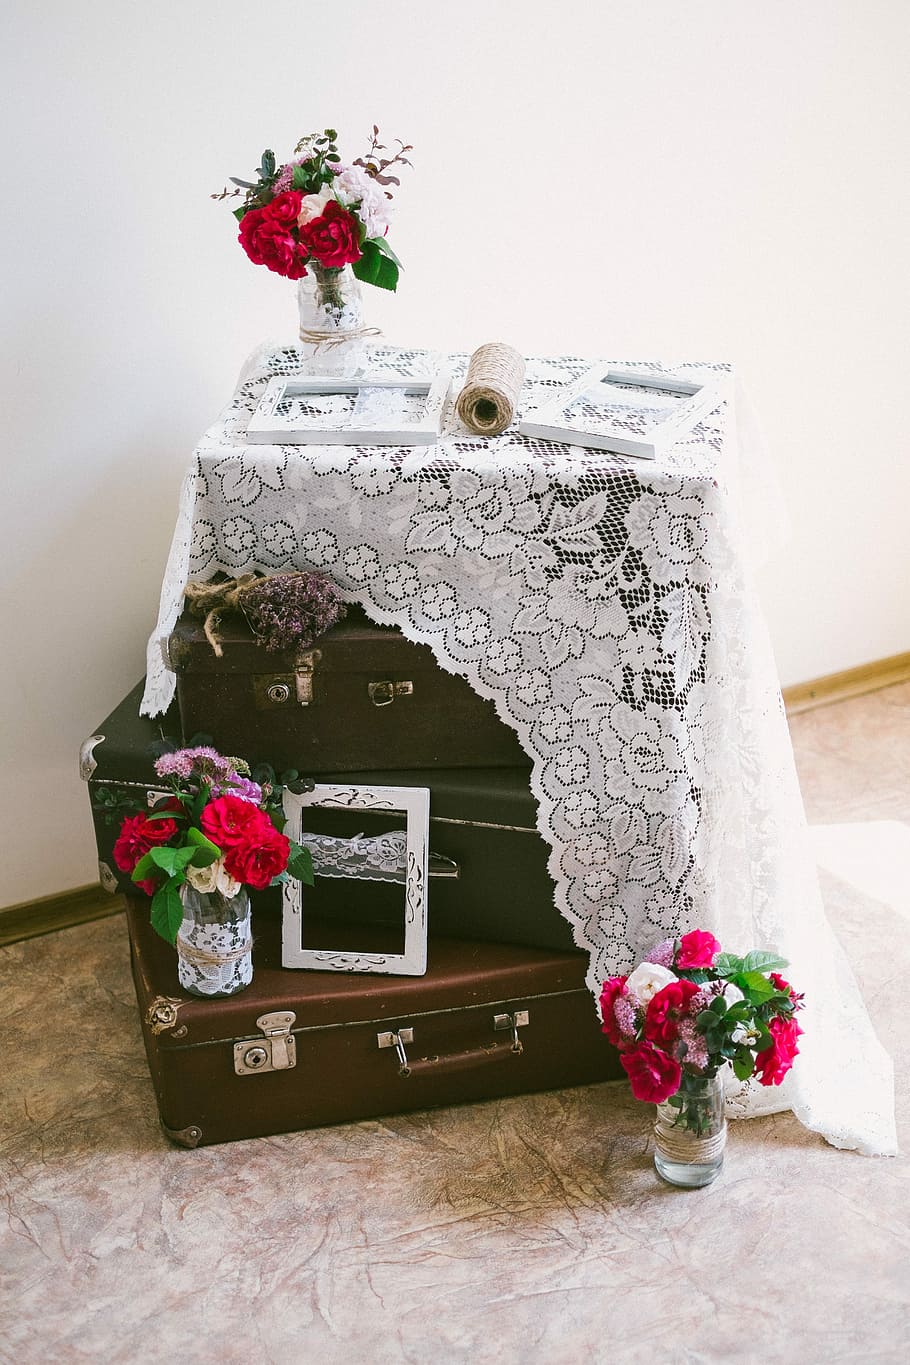 Decor, Ornament, Element, Style, clearance, retro, flower, old-fashioned, suitcase, correspondence